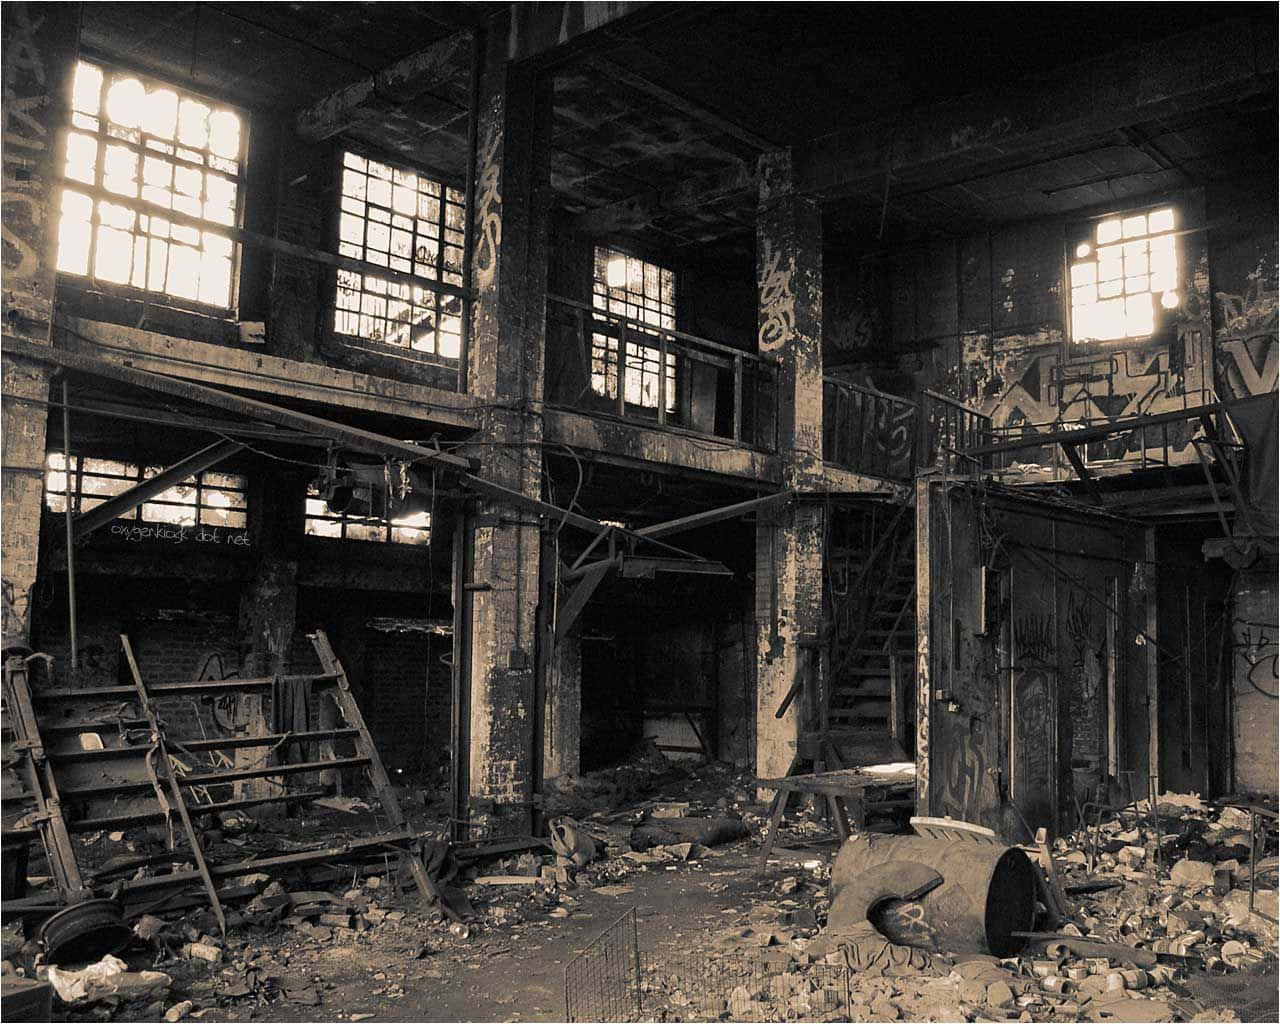 A Black And White Photo Of An Abandoned Factory